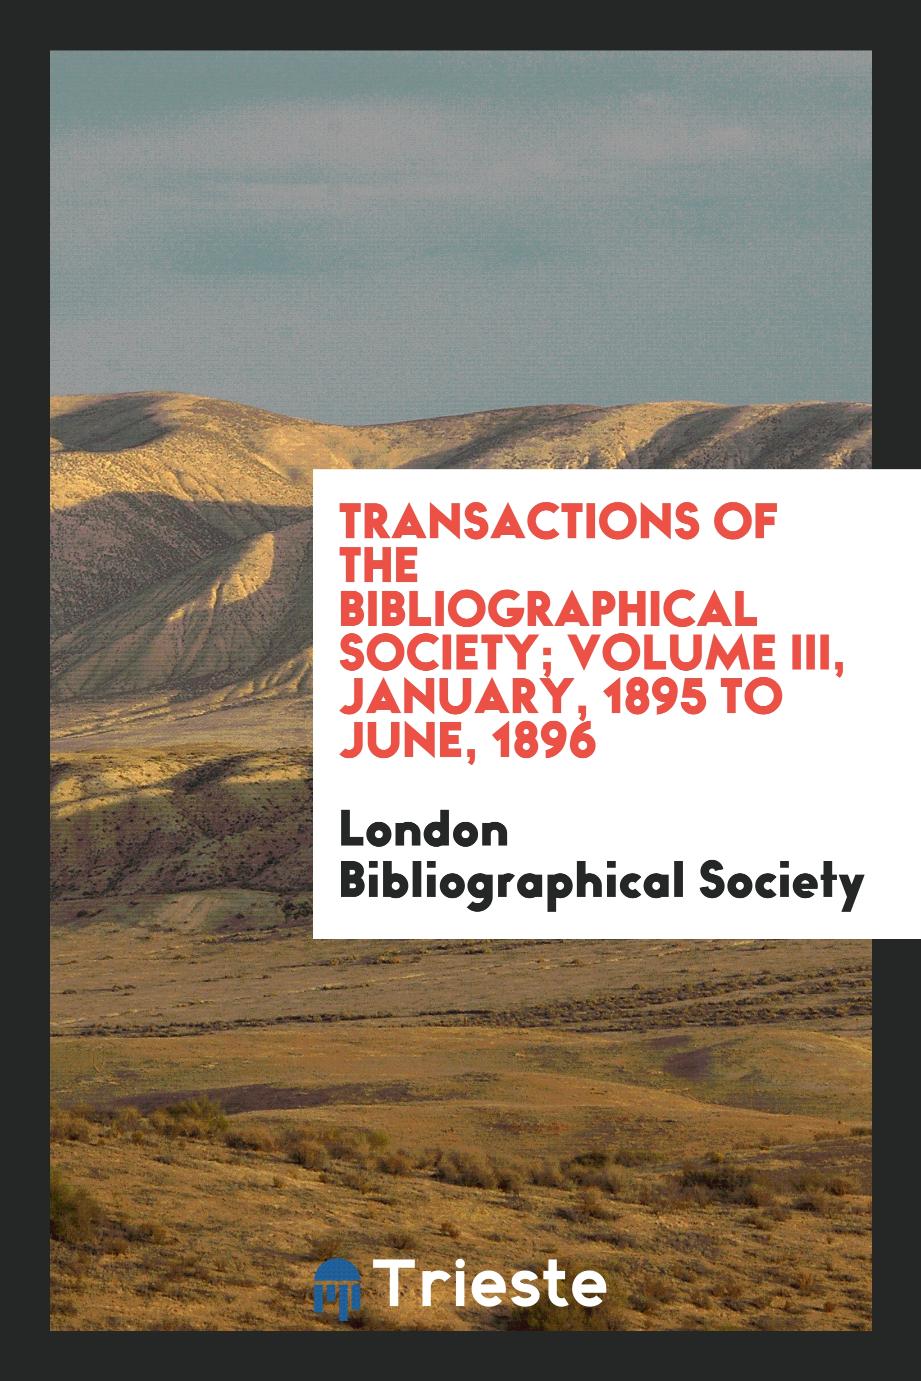 Transactions of the Bibliographical Society; Volume III, January, 1895 to June, 1896